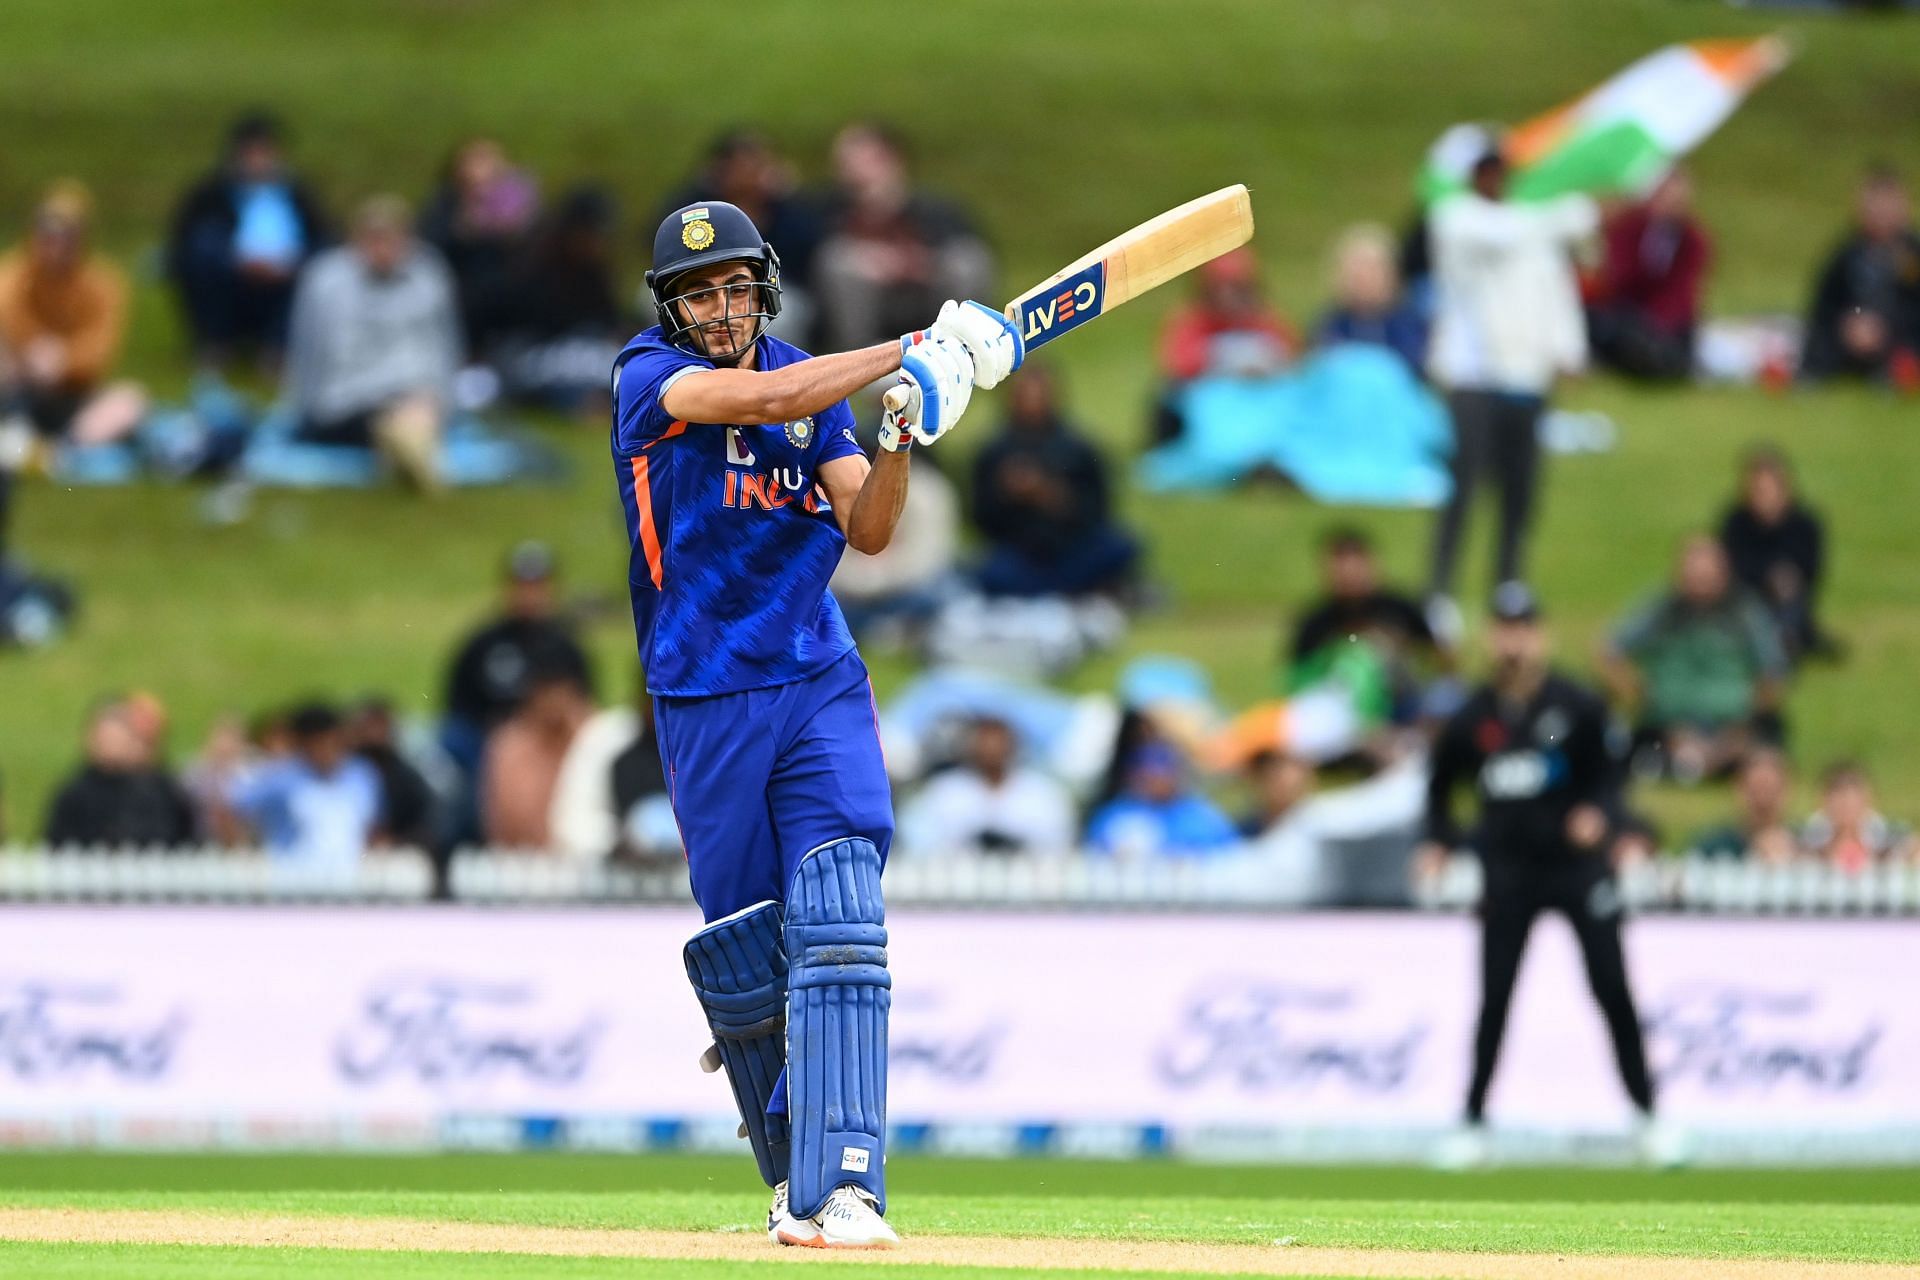 Shubman Gill has had an excellent start to his ODI career.